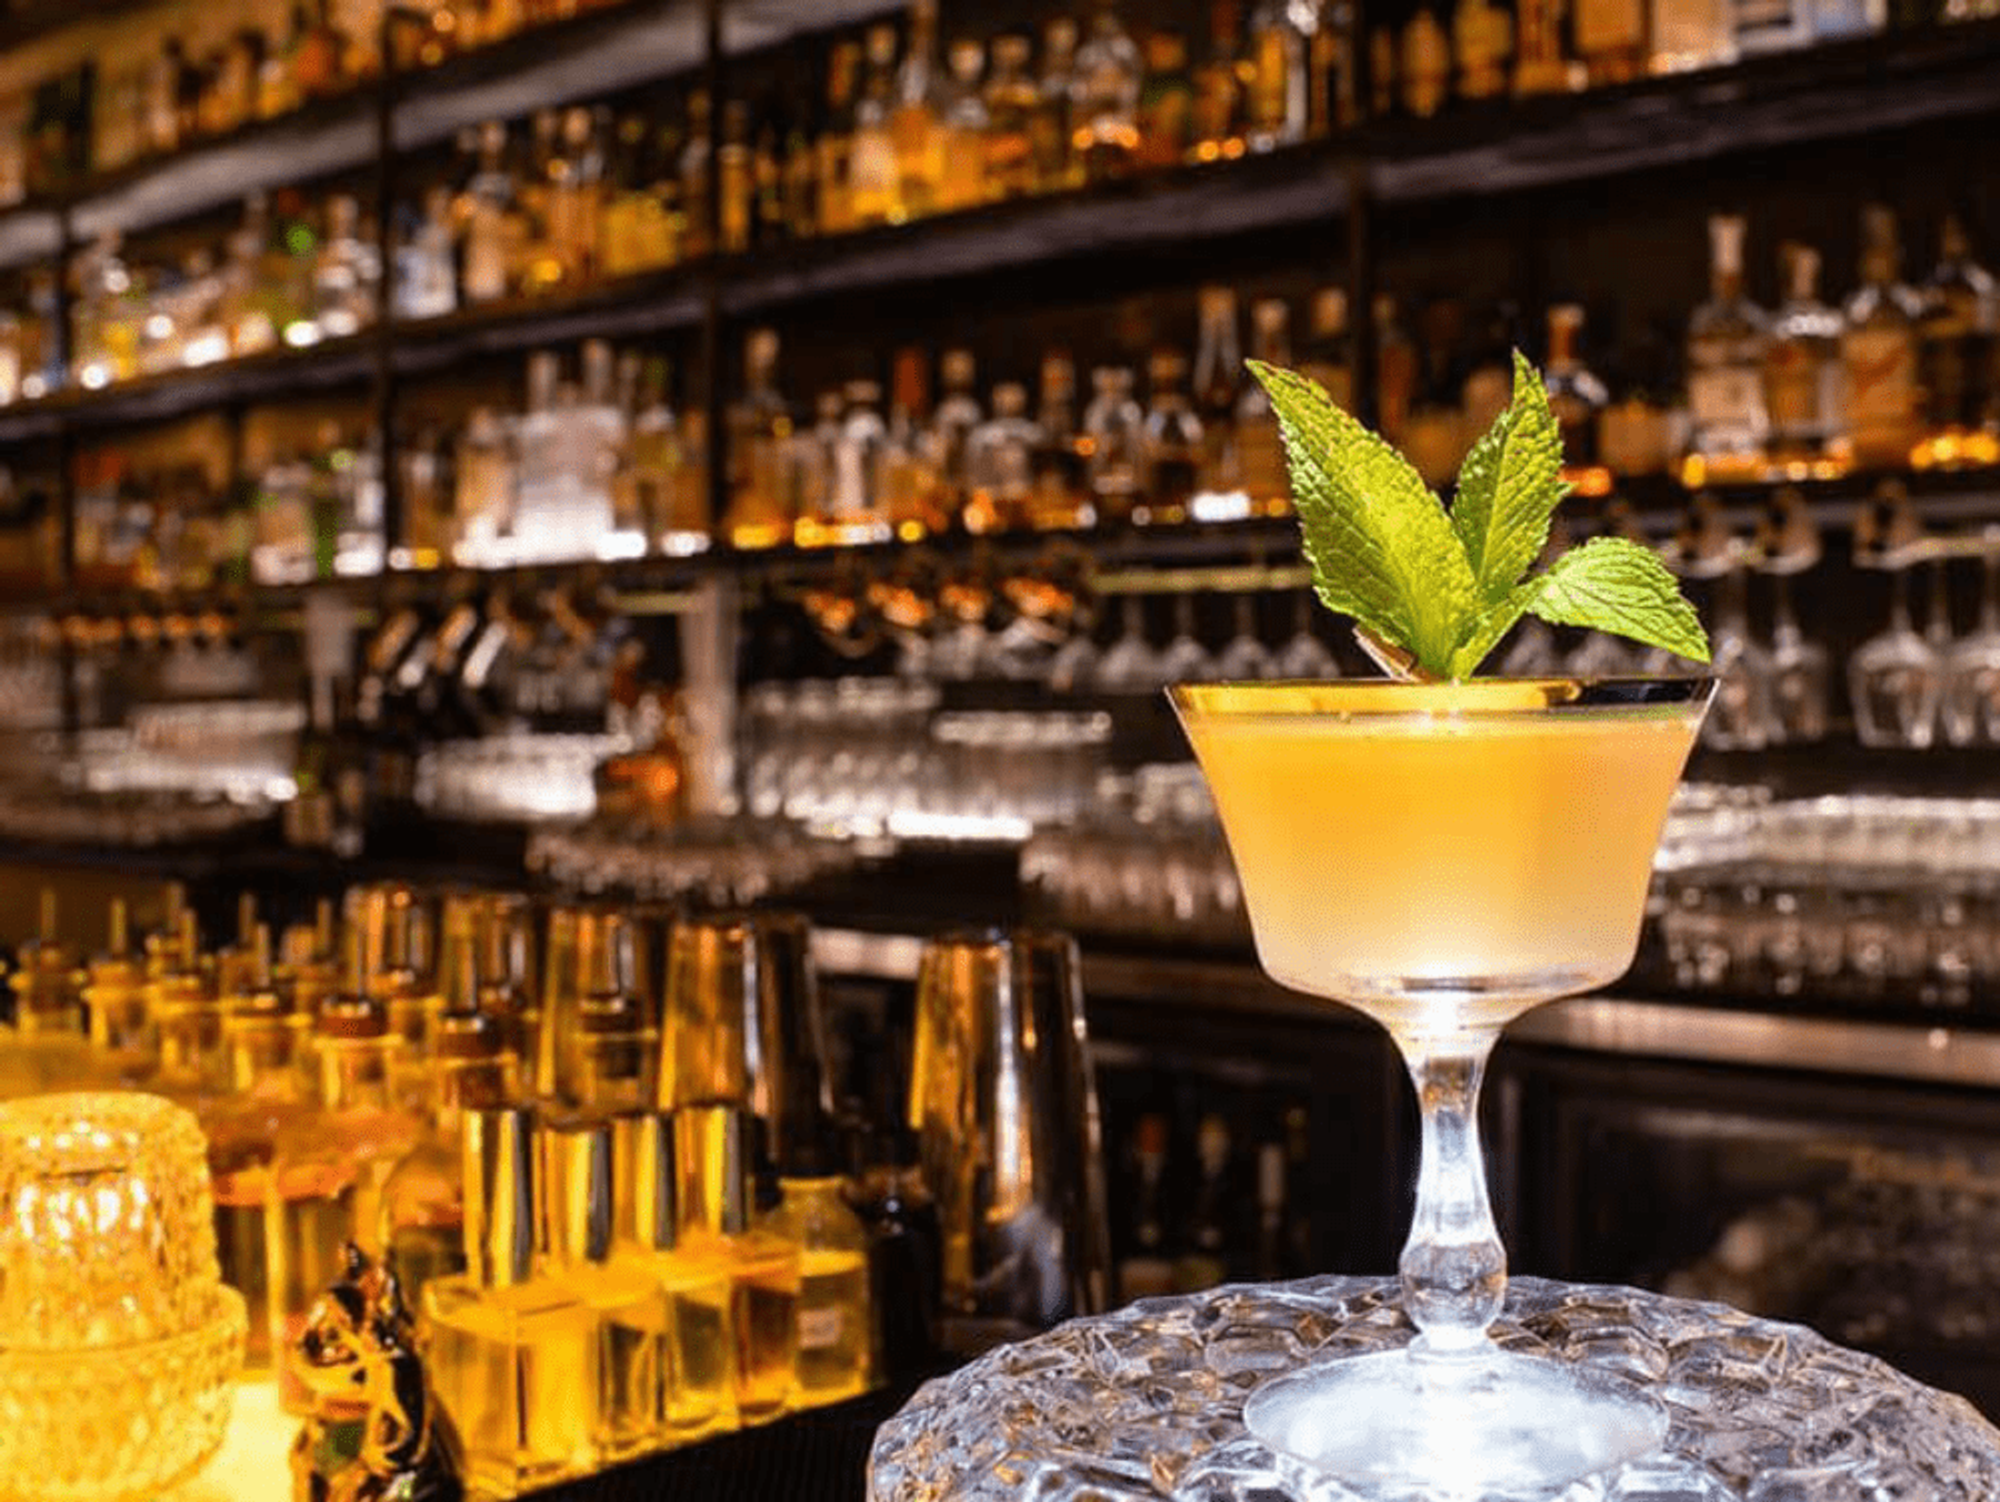 Let the historical cocktail menu and expert bartenders be your guide at The Roosevelt Room.